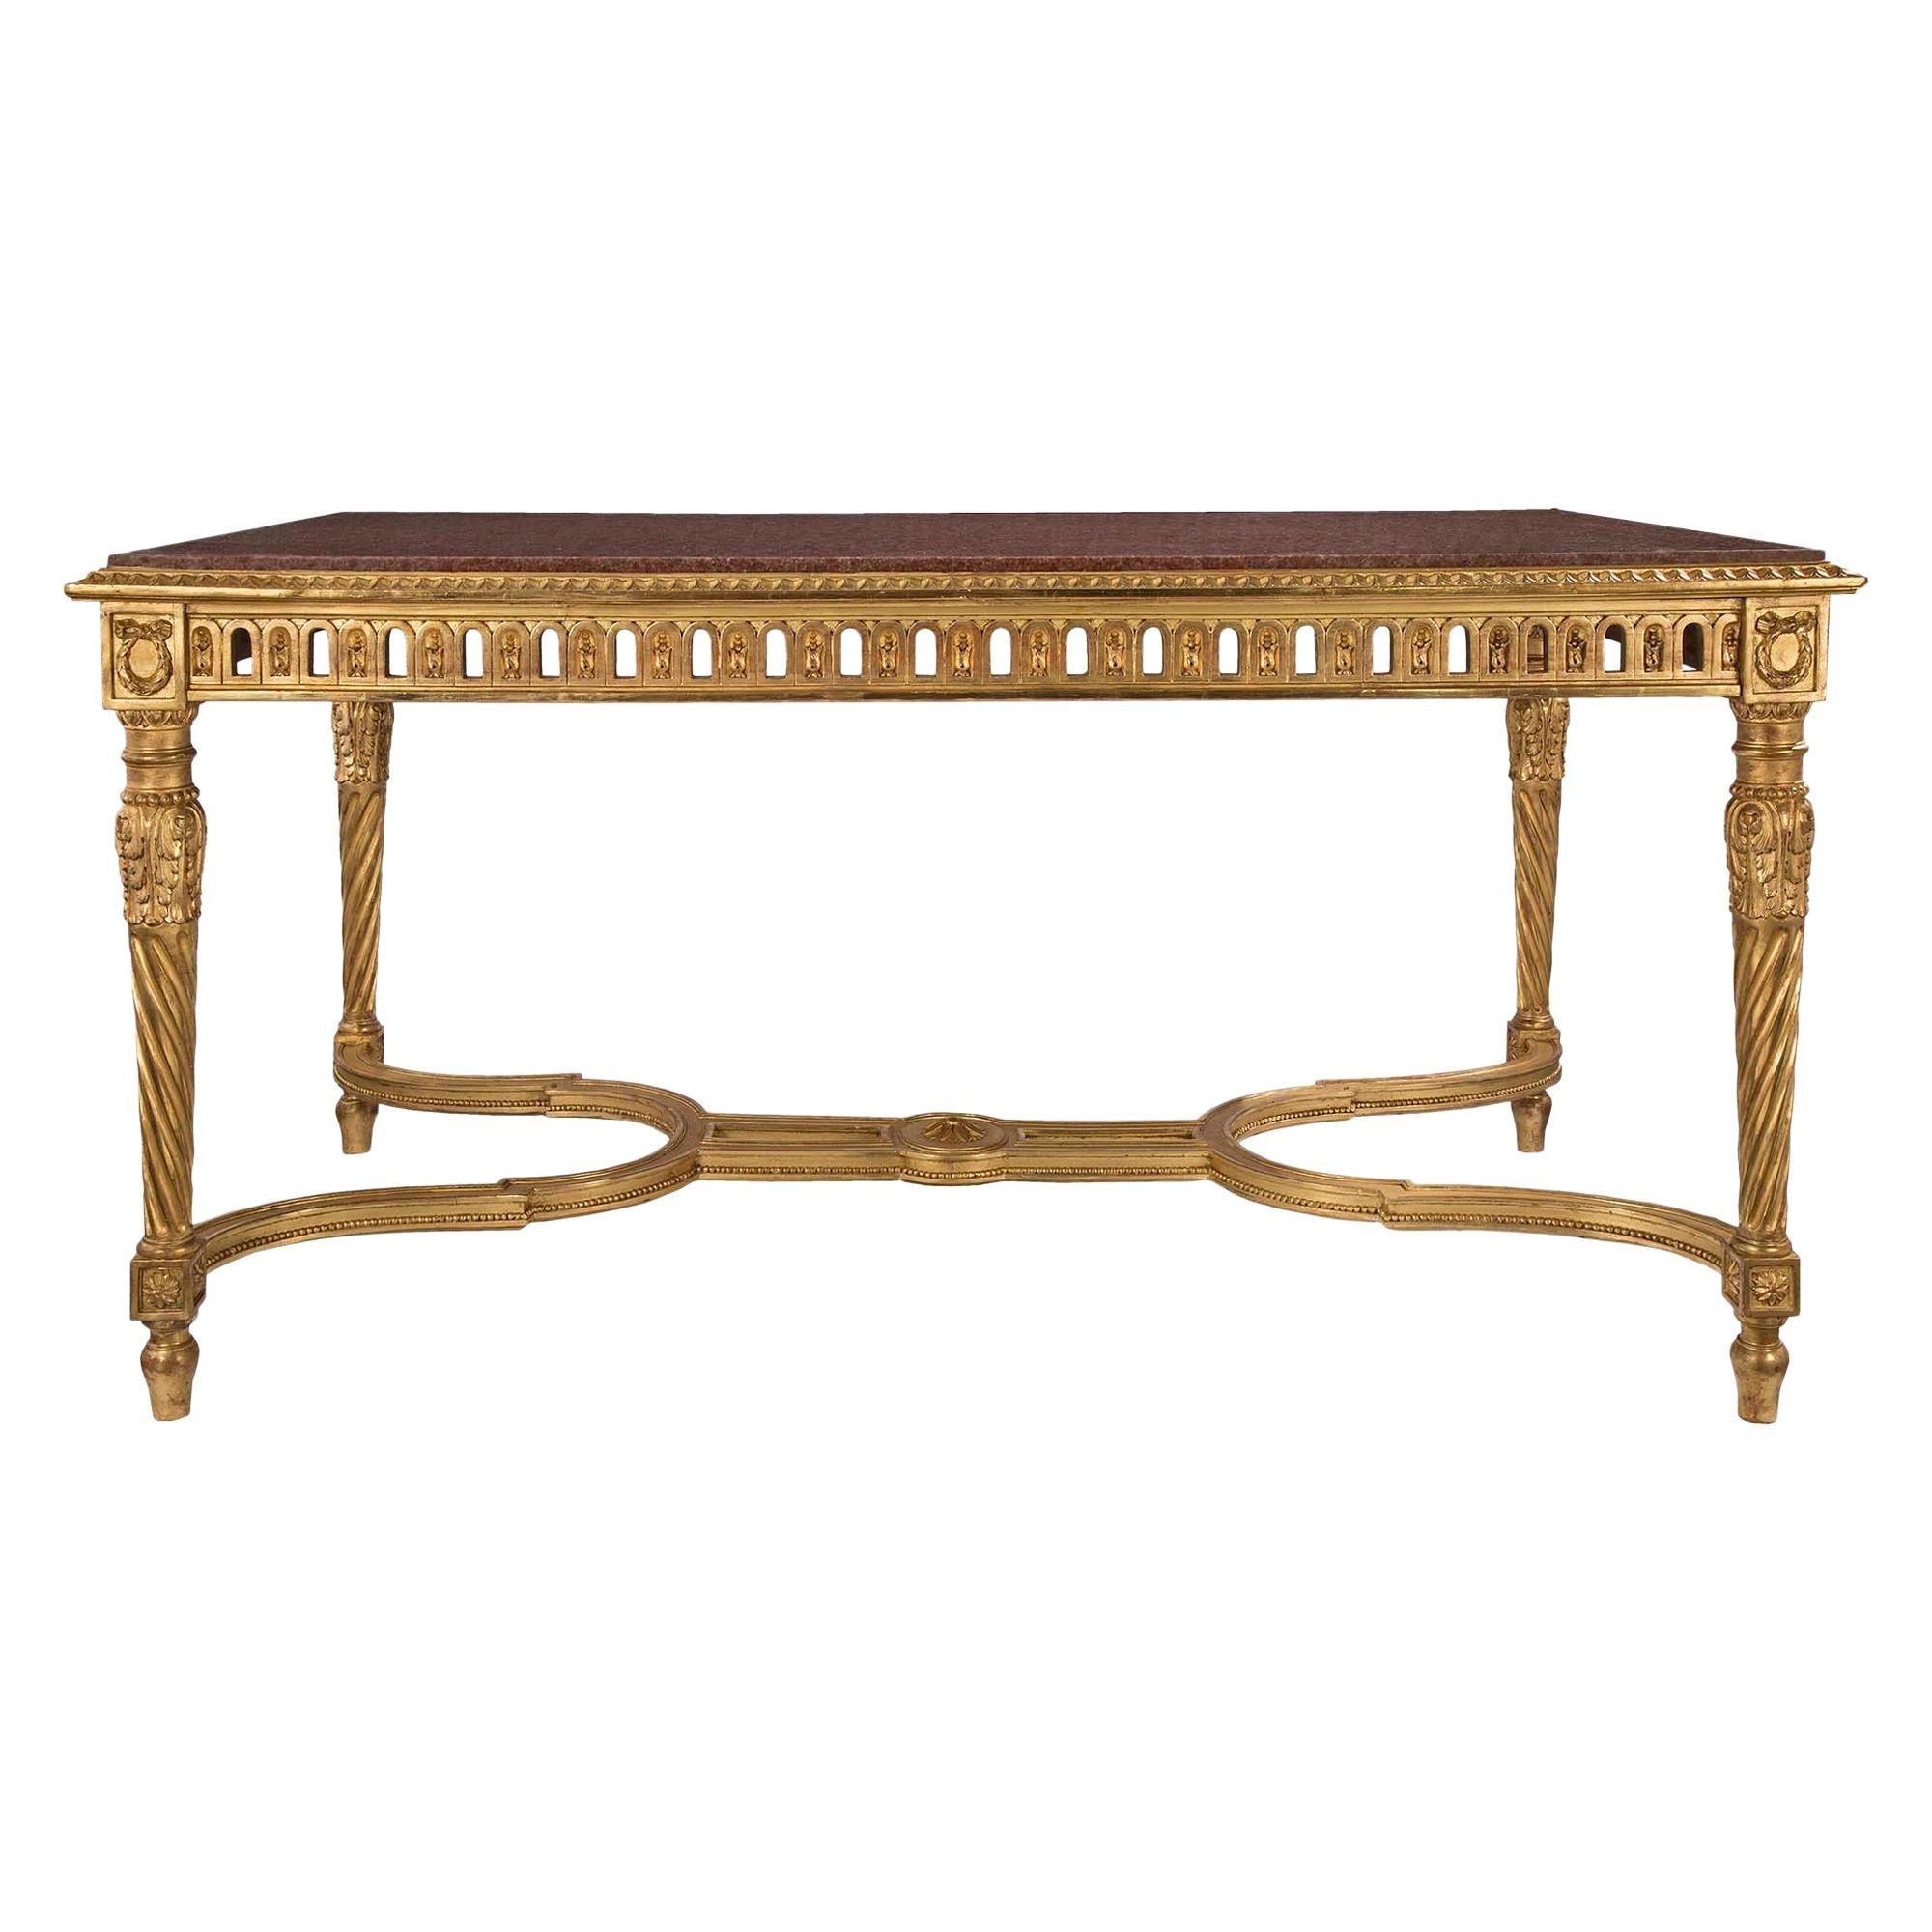 French 19th Century Louis XVI Style Giltwood and Marble Center Table For Sale